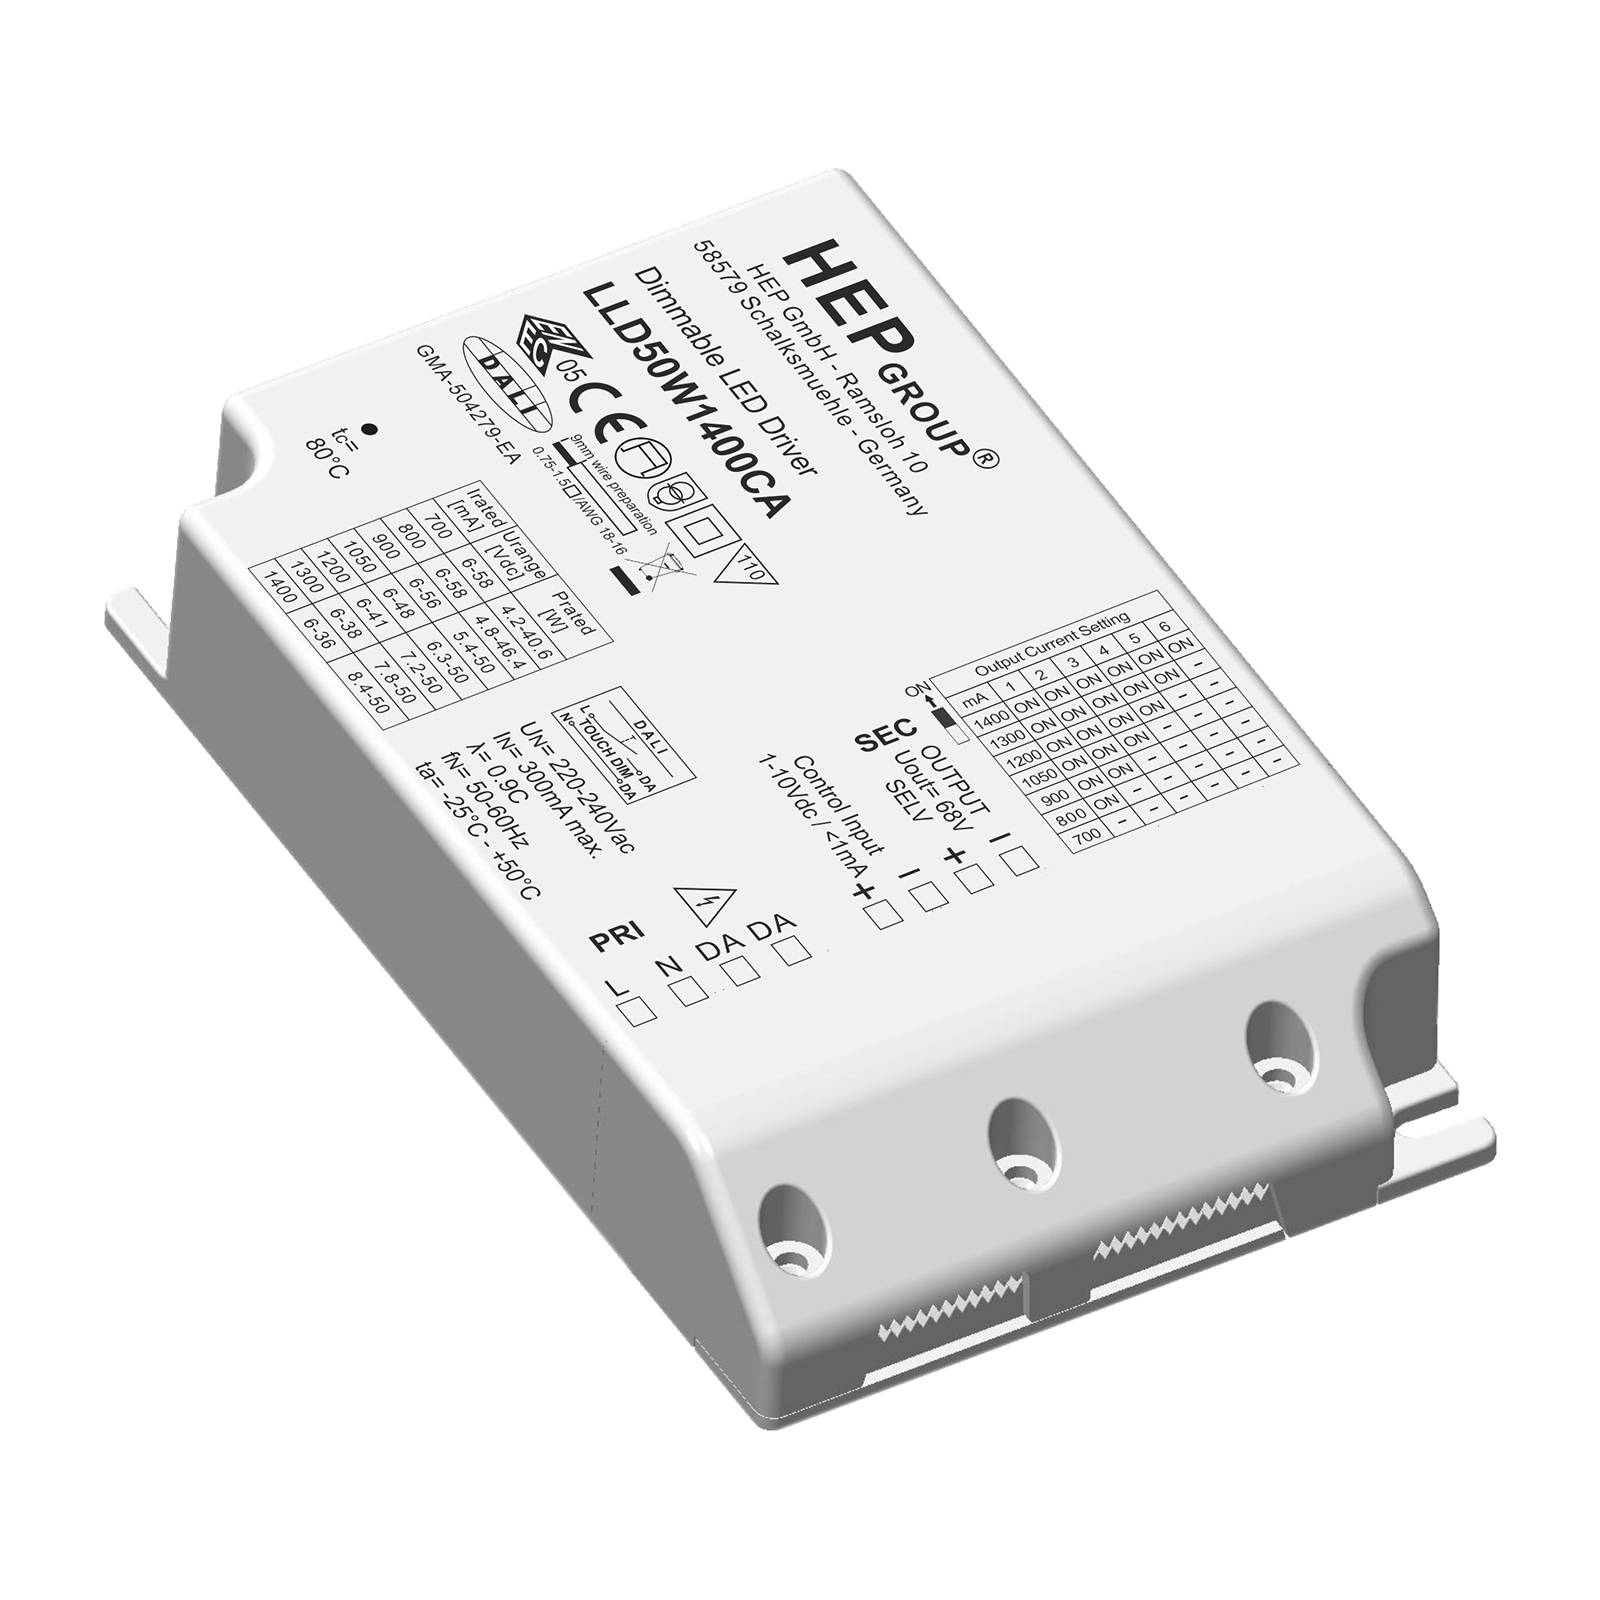 Driver LED LLD, 50 W, 1400 mA, dimmable, CC